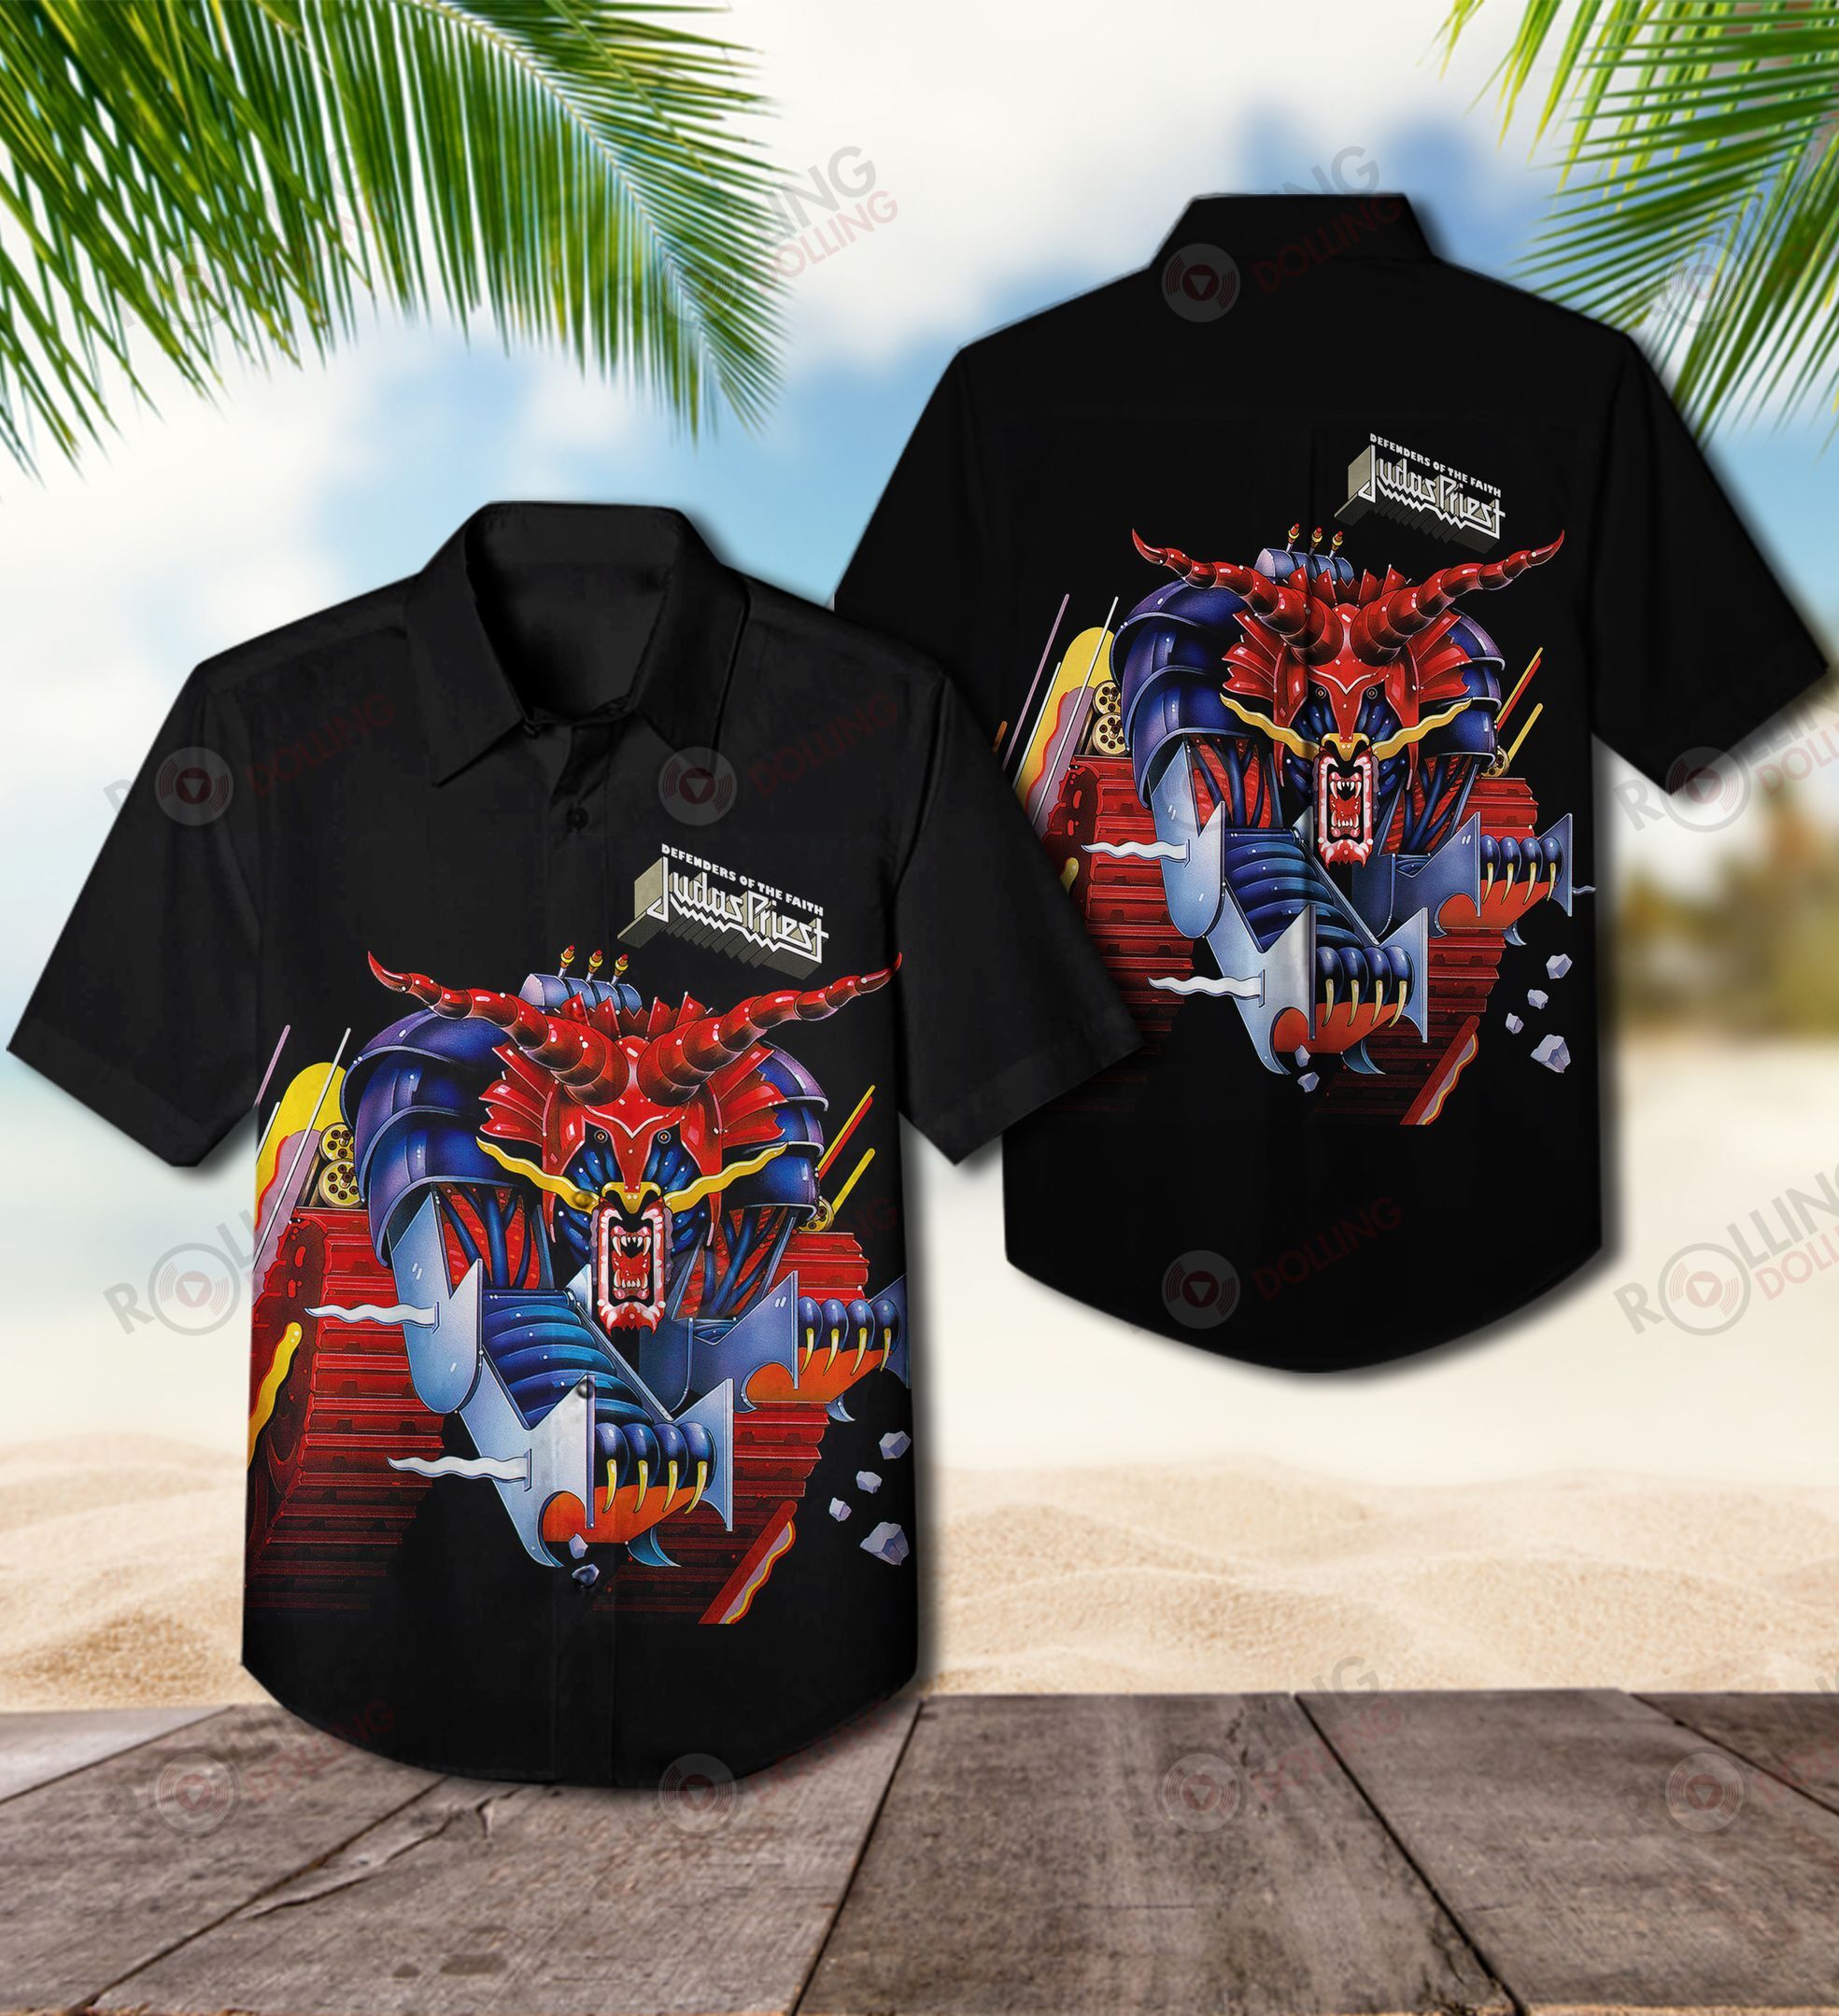 This would make a great gift for any fan who loves Hawaiian Shirt as well as Rock band 118